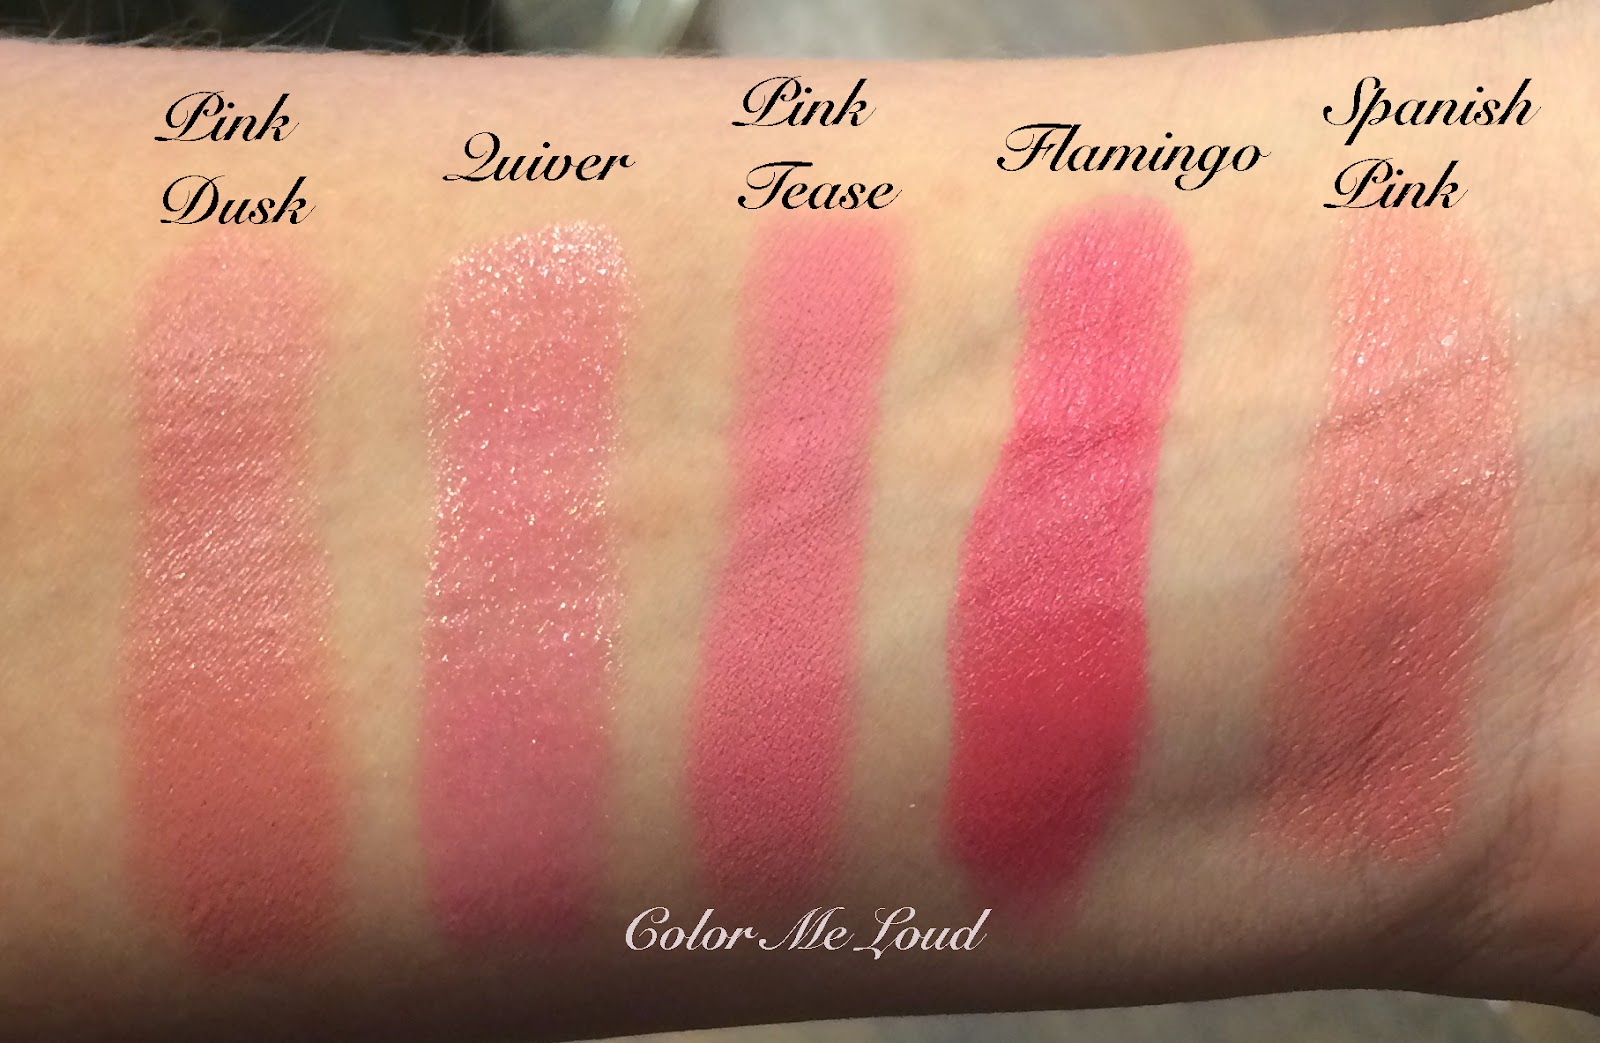 Tom Ford Lip Color in Pink Tease and Cream Color For Eyes in Platinum for Holiday 2014 Collection, Review, Swatch, Comparison & FOTD | Color Me Loud